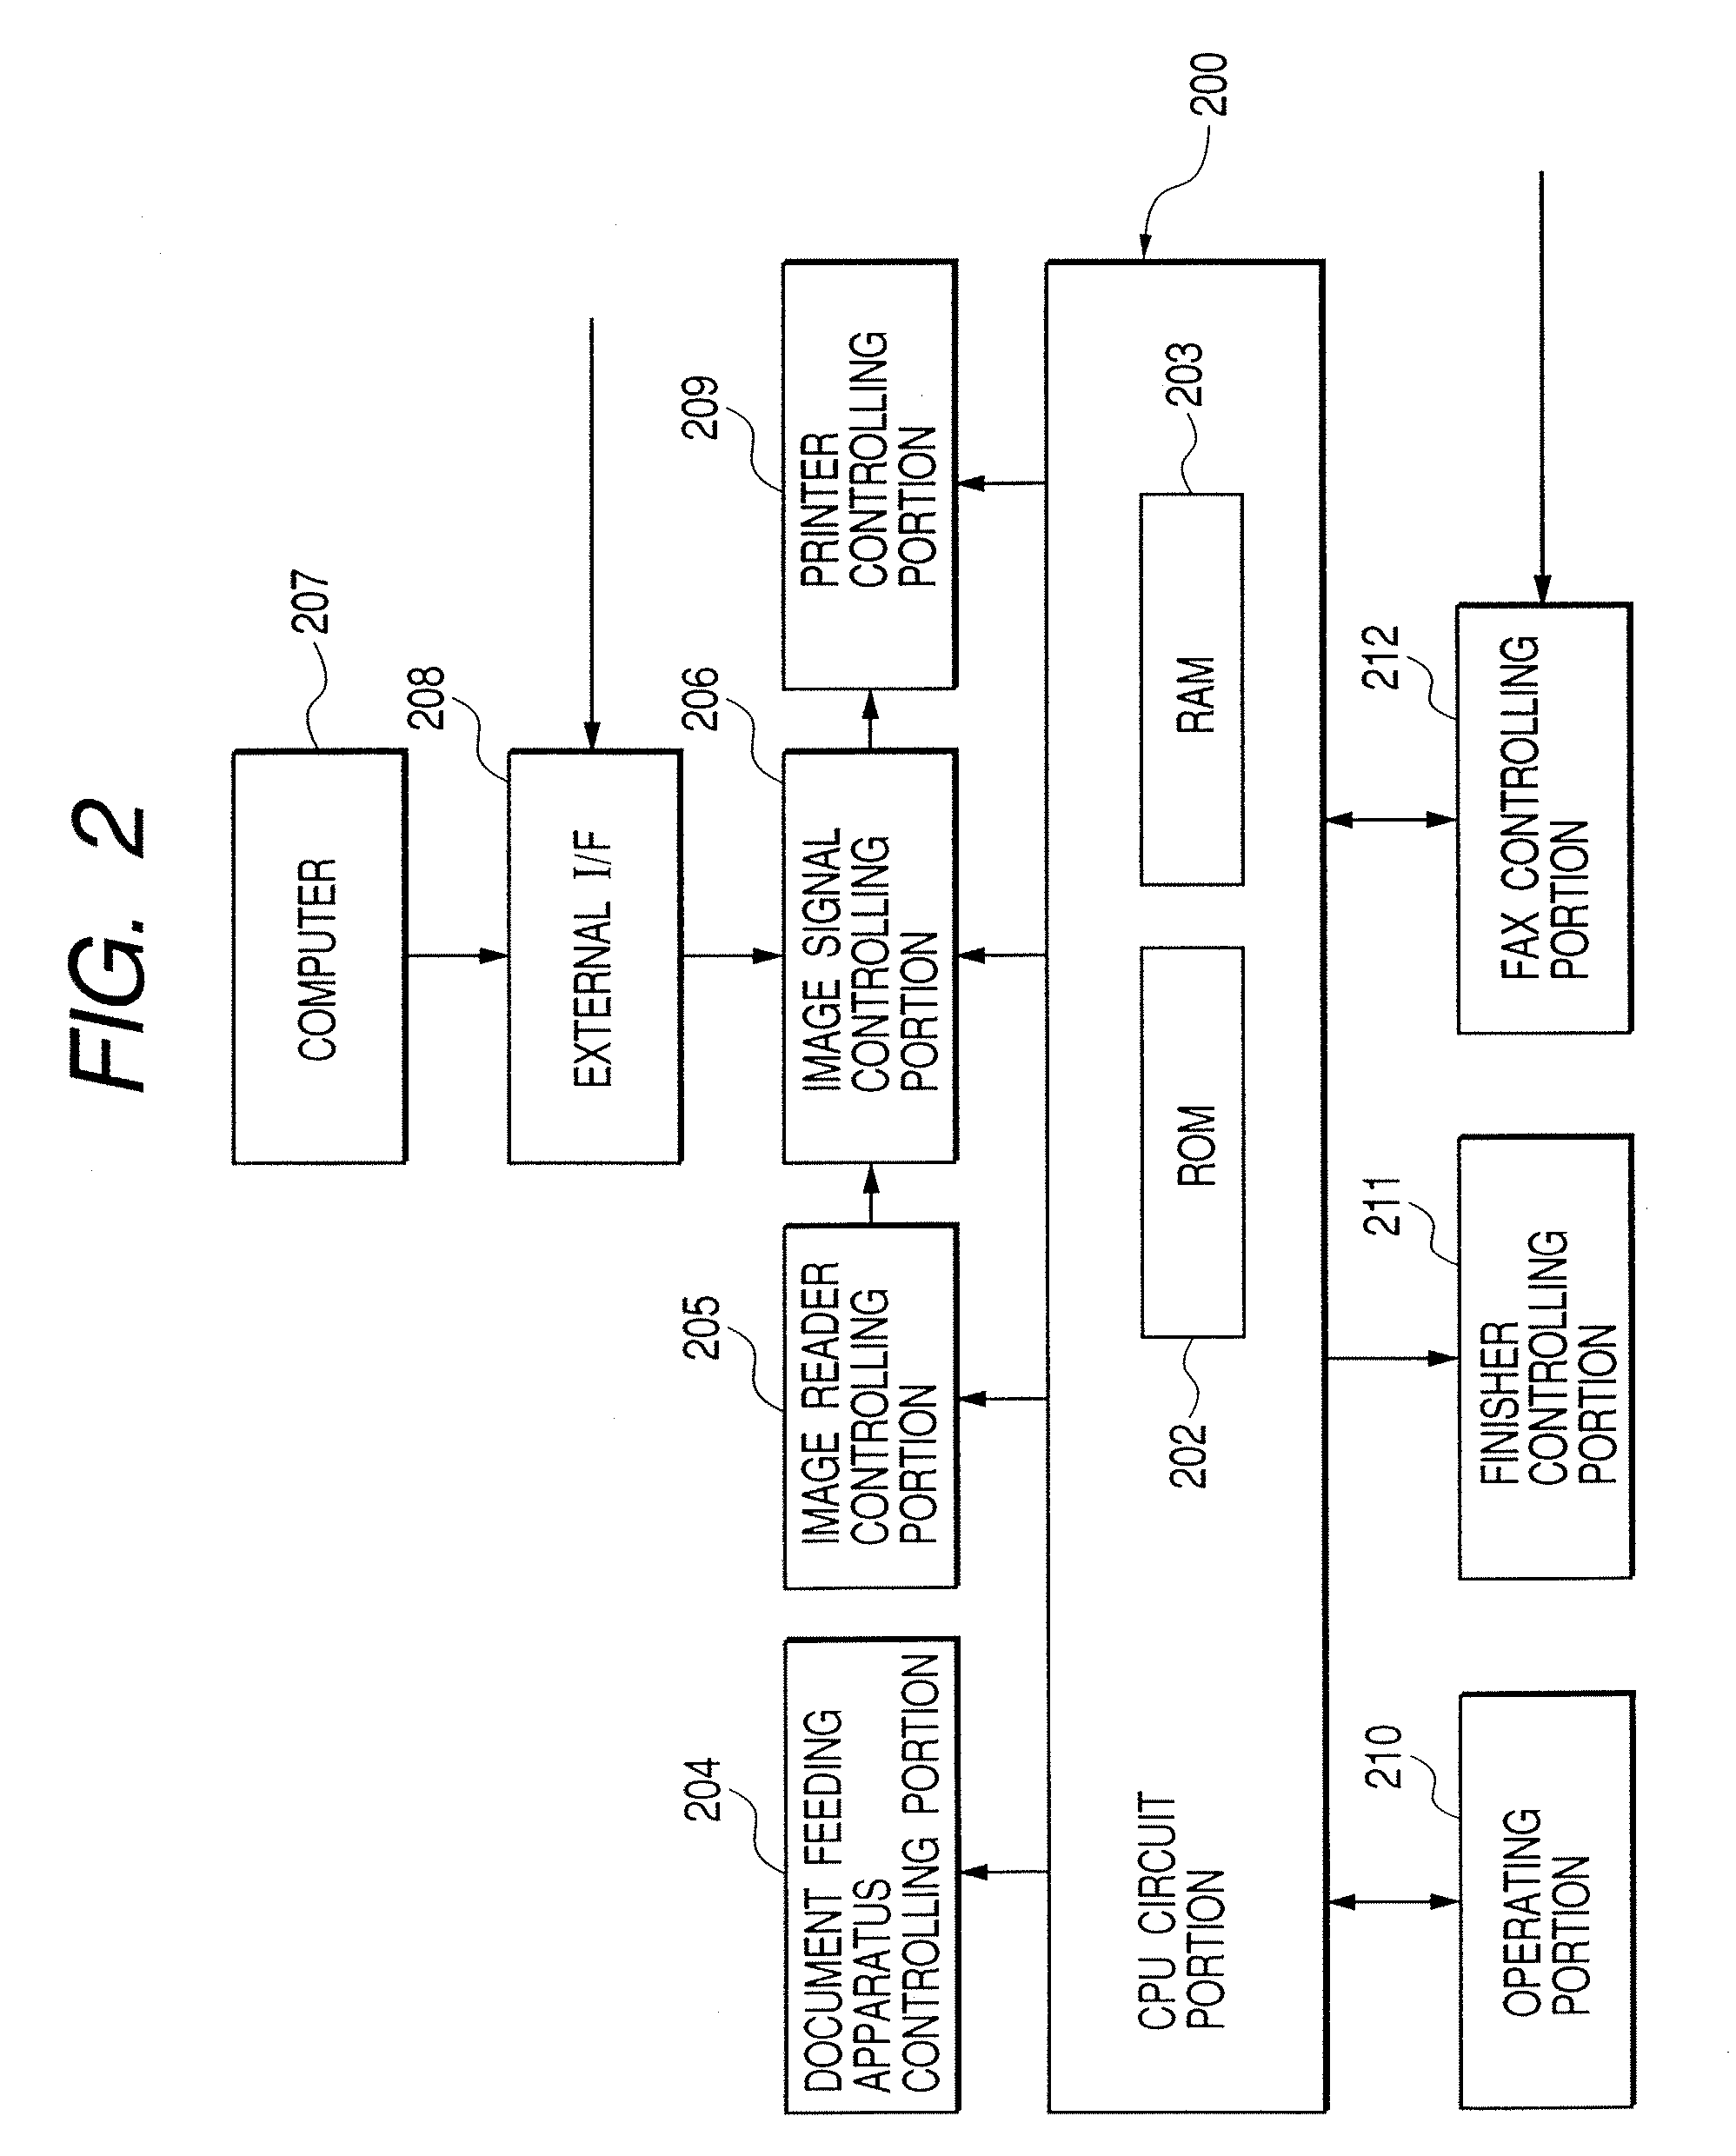 Sheet processing apparatus with controller for controlling sheet supply unit